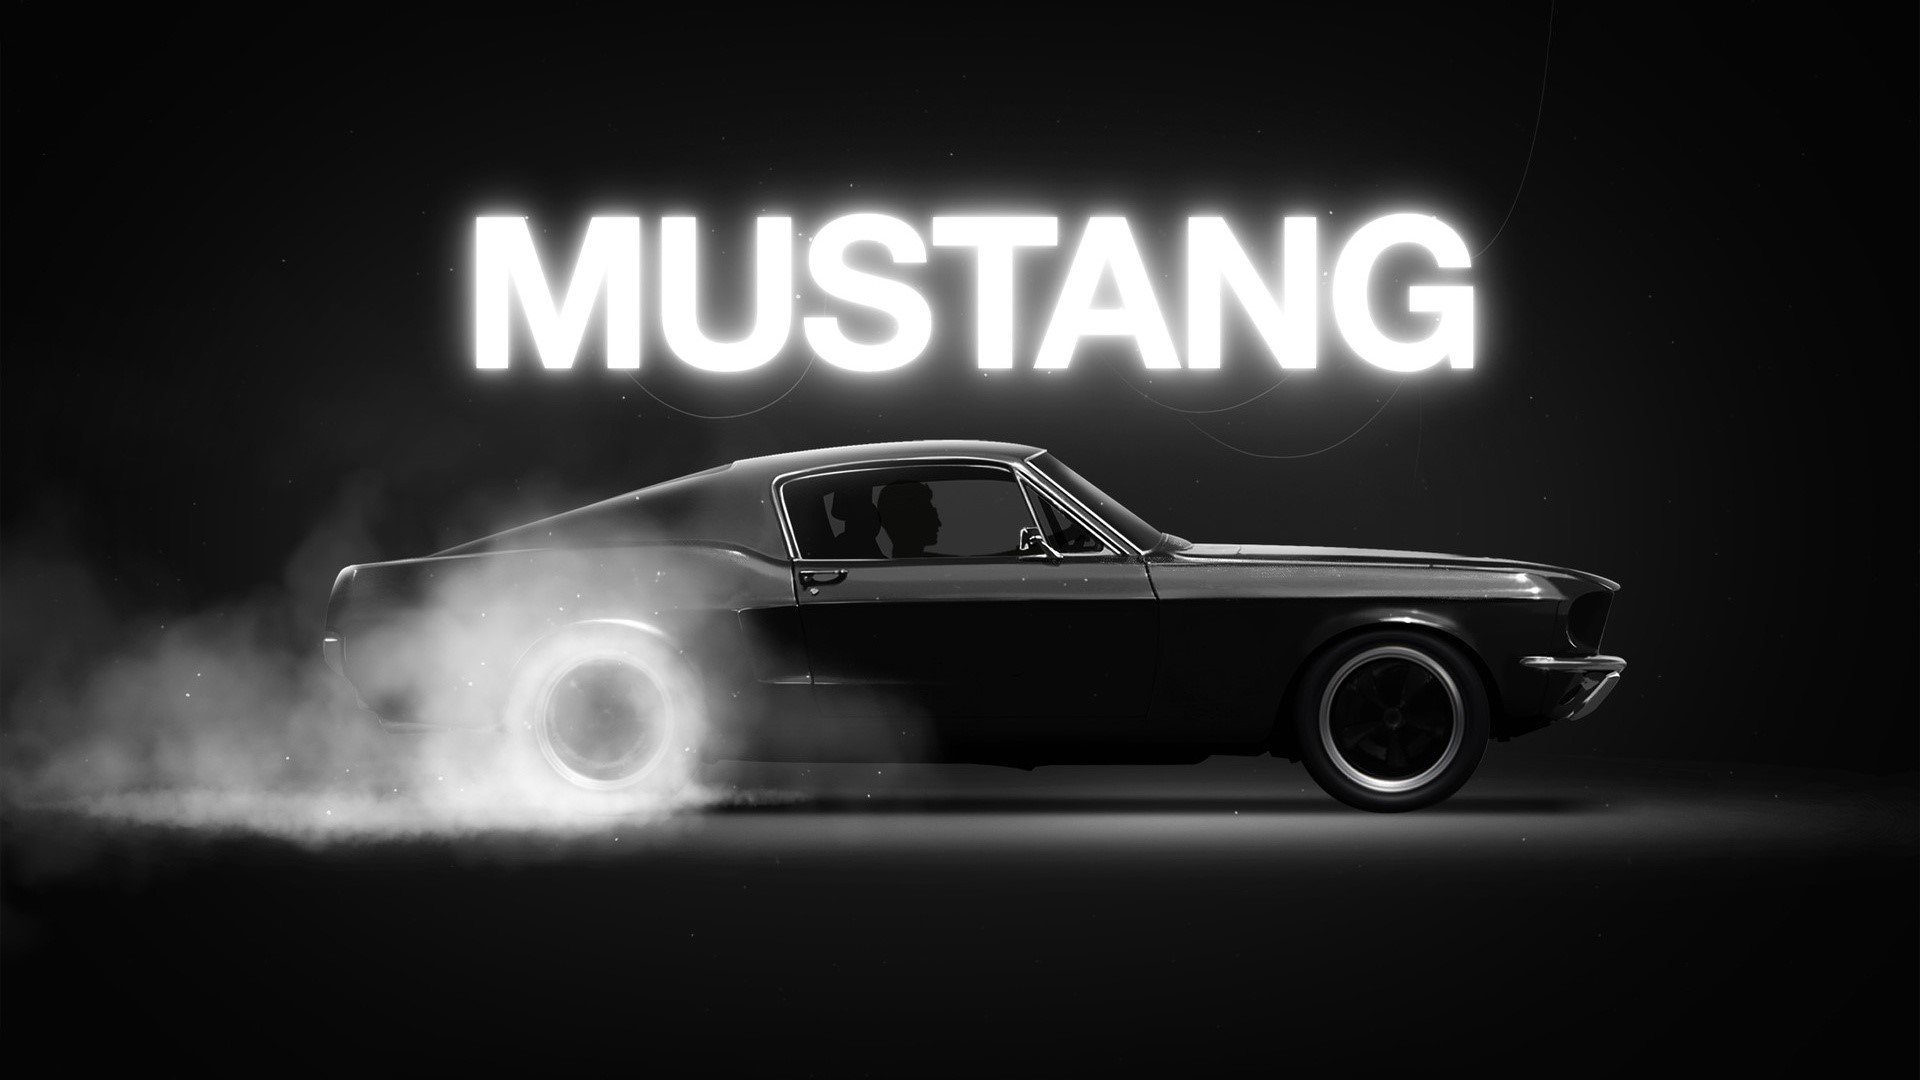 HD Wallpaper for theme: Mustang (Car) HD wallpaper, background